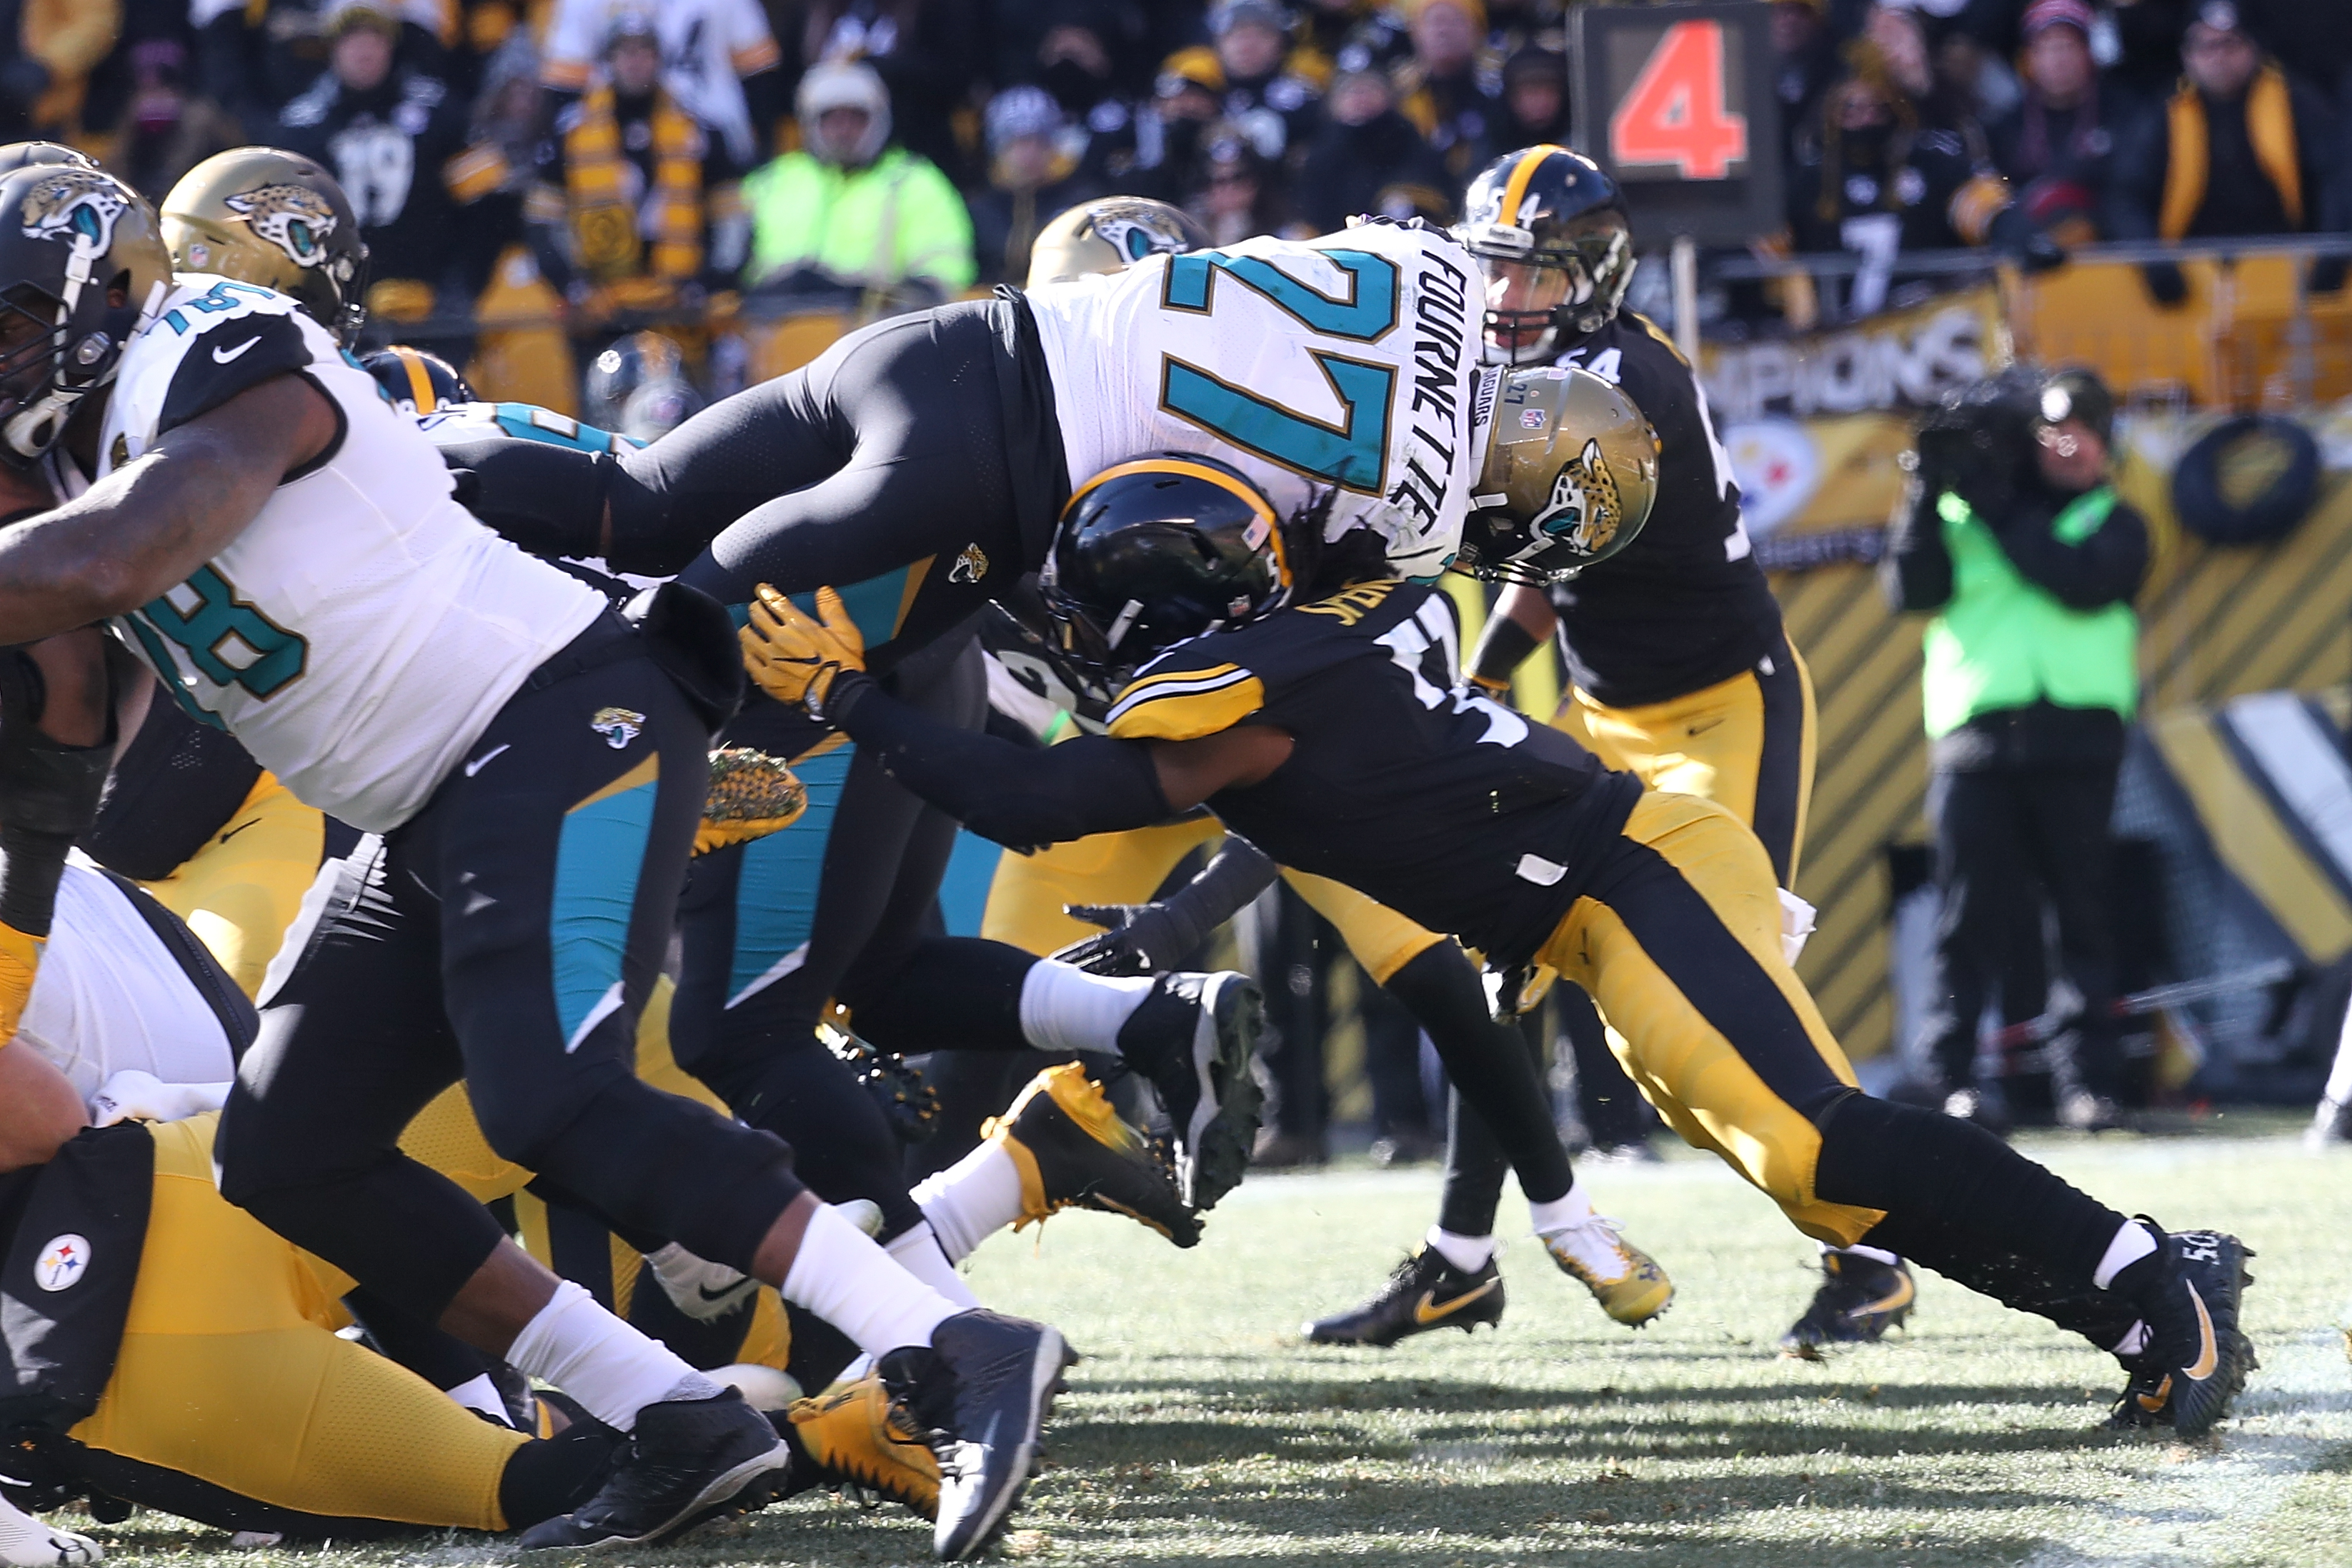 Jaguars win first playoff game in 10 years, advance to divisional round  against Steelers